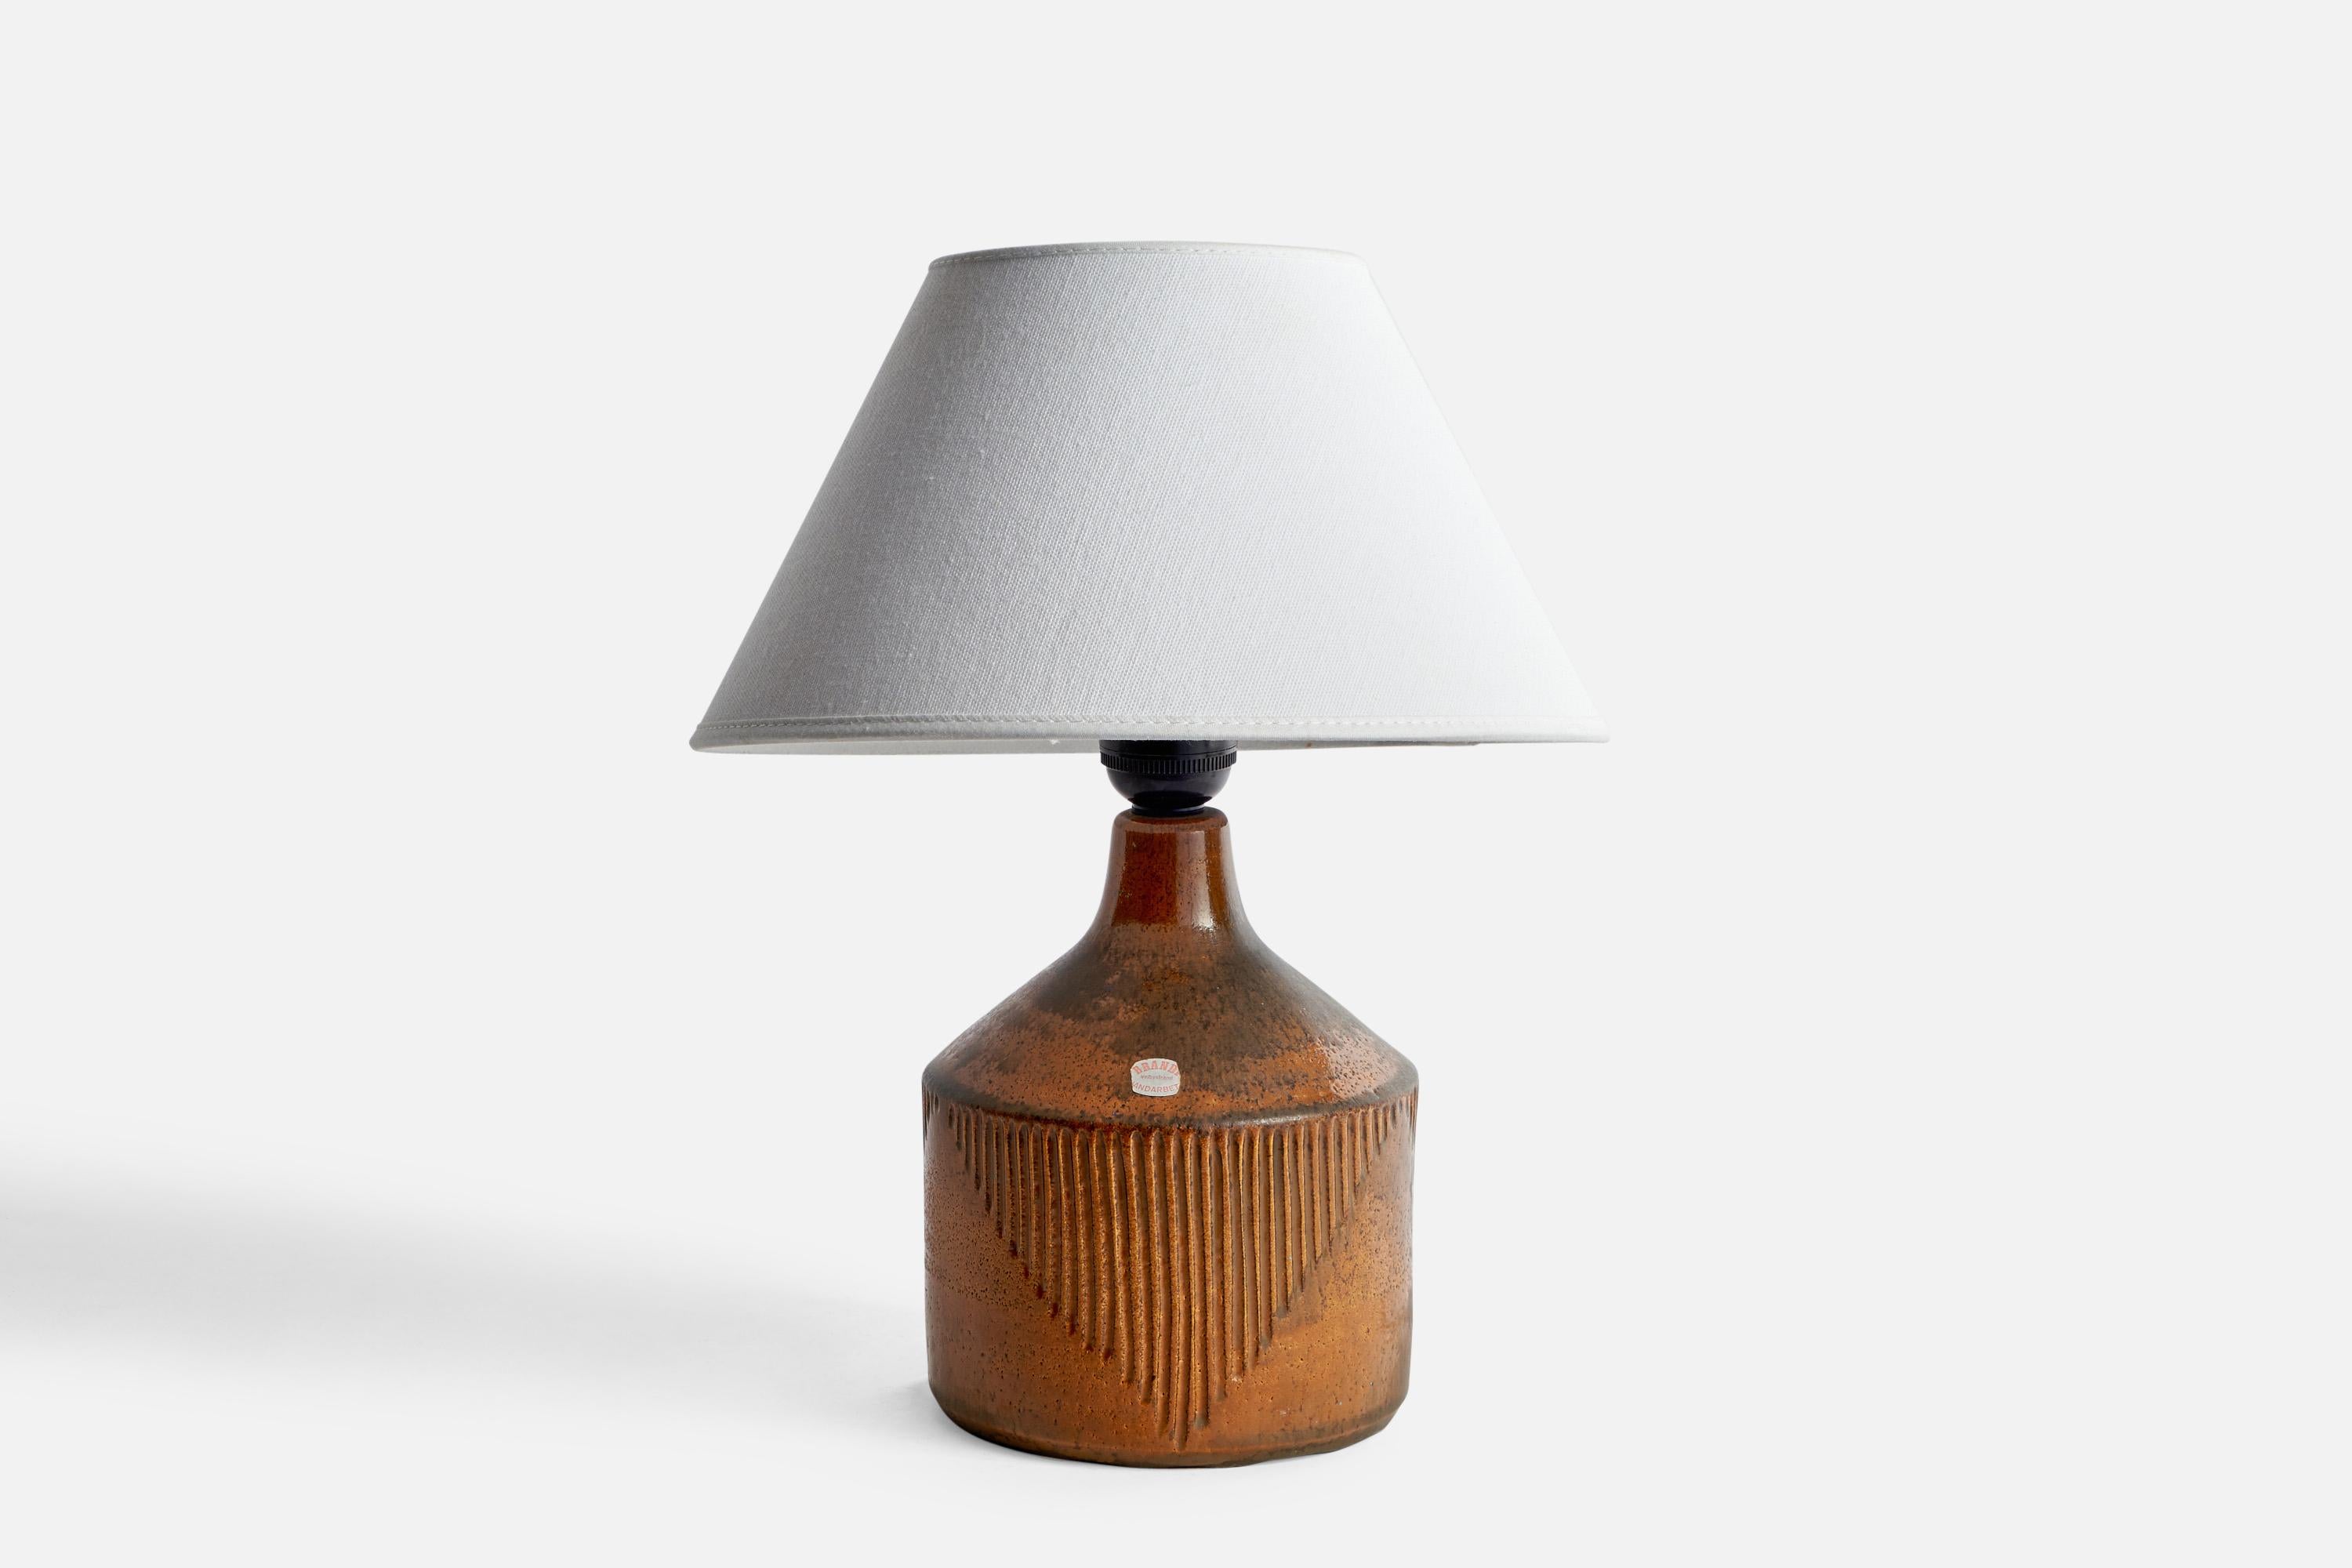 A brown-glazed incised table lamp designed and produced in Sweden, 1960s.

Dimensions of Lamp (inches): 9” H x 5.45” Diameter
Dimensions of Shade (inches): 4.5” Top Diameter x 10” Bottom Diameter x 5.25” H
Dimensions of Lamp with Shade (inches):